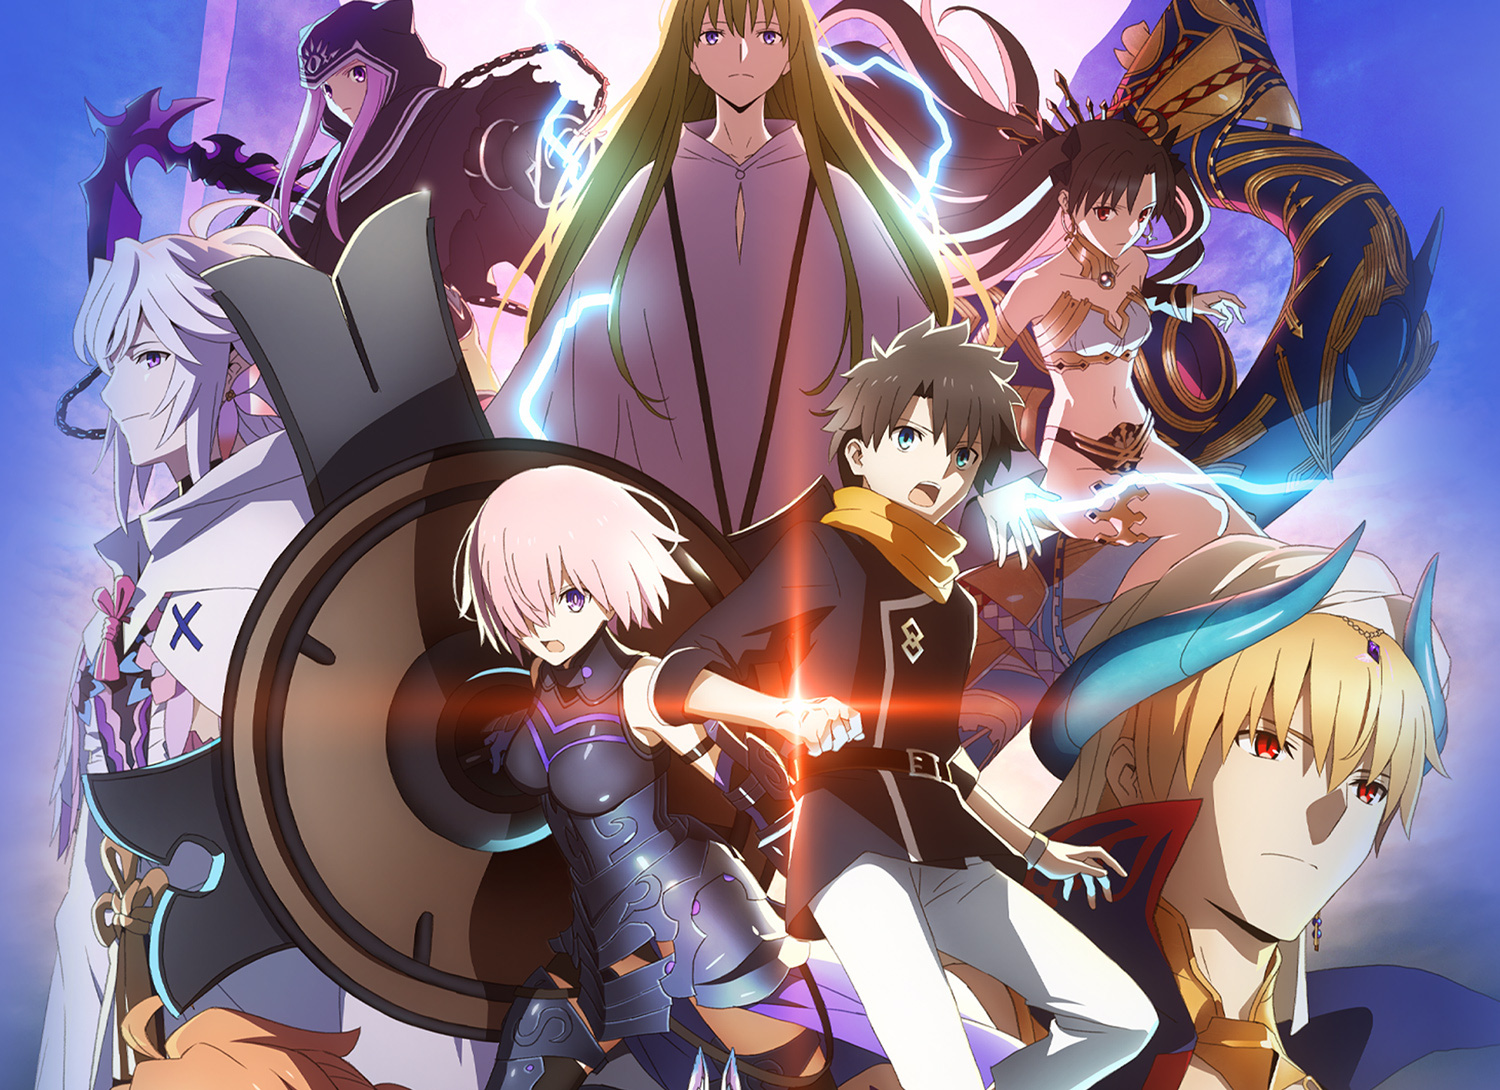 Pin by ivan emanuel on Fate series | Fate stay night anime, Fate anime  series, Anime characters